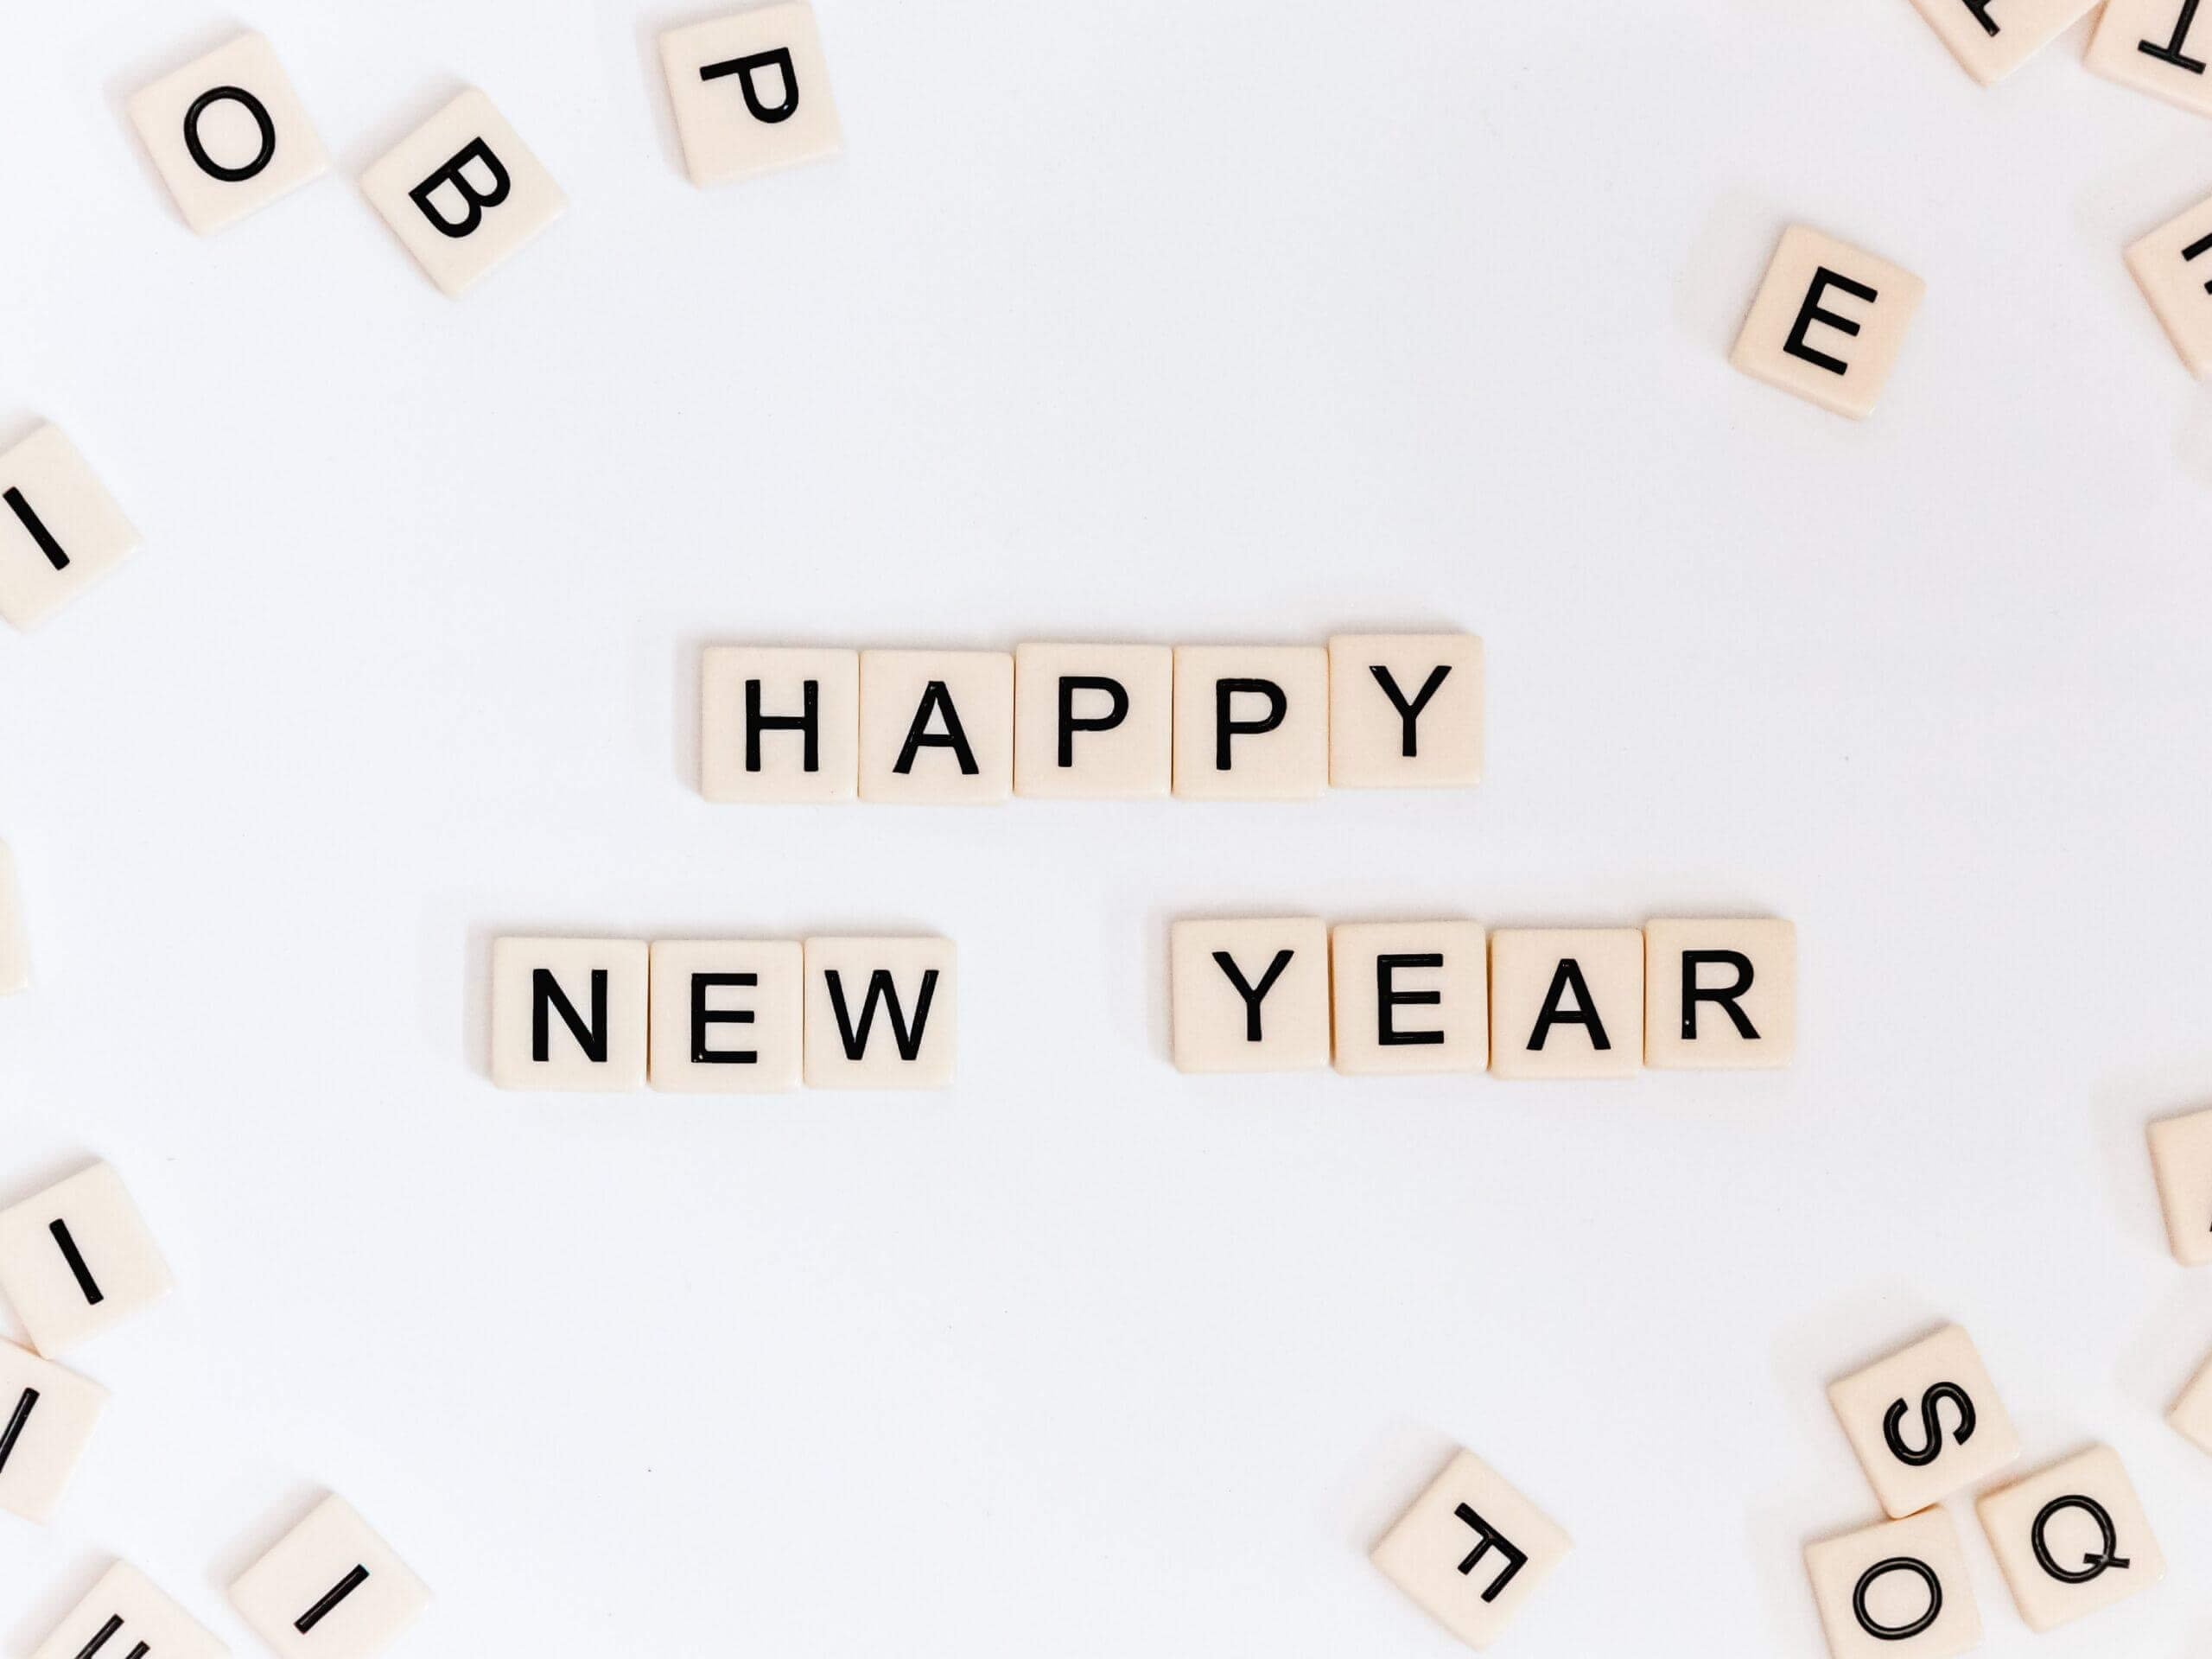 Happy New Year spelled out in scrabble pieces.